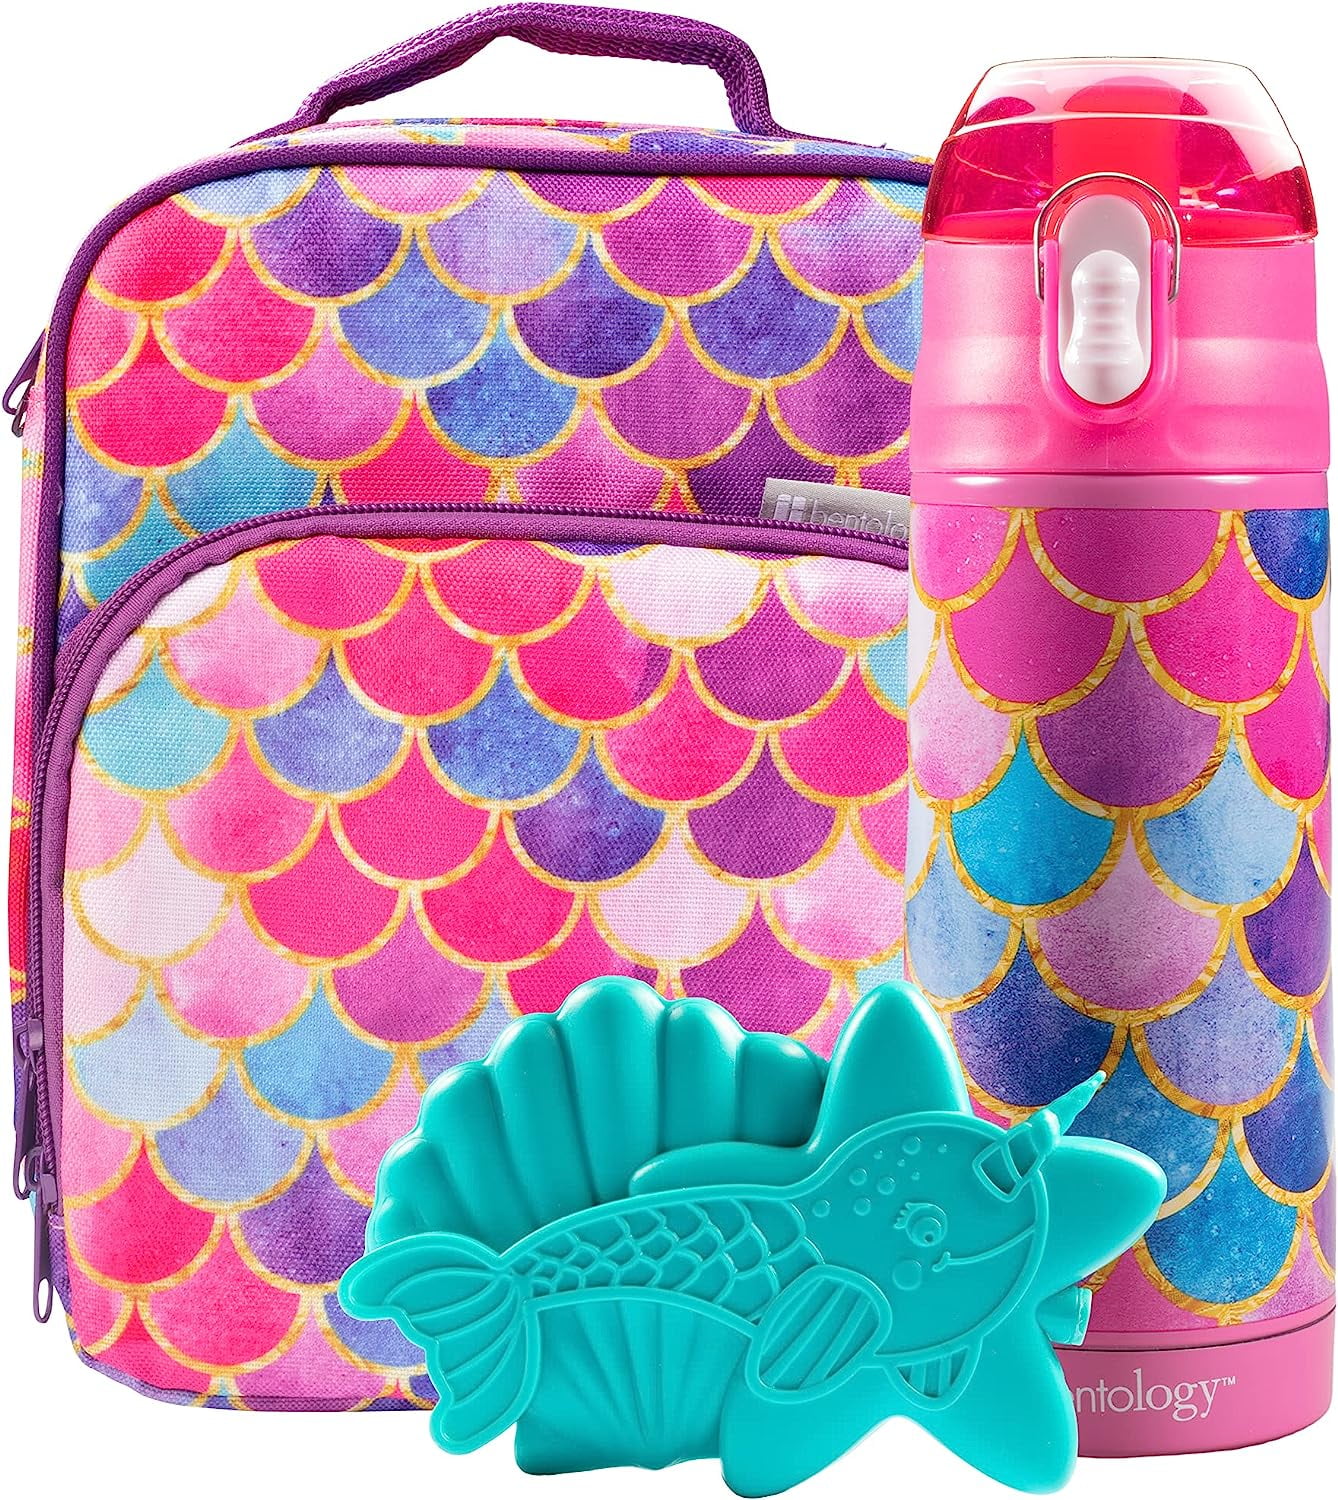 Bentology Lunch Box Set for Kids - Girls Insulated Lunchbox Tote